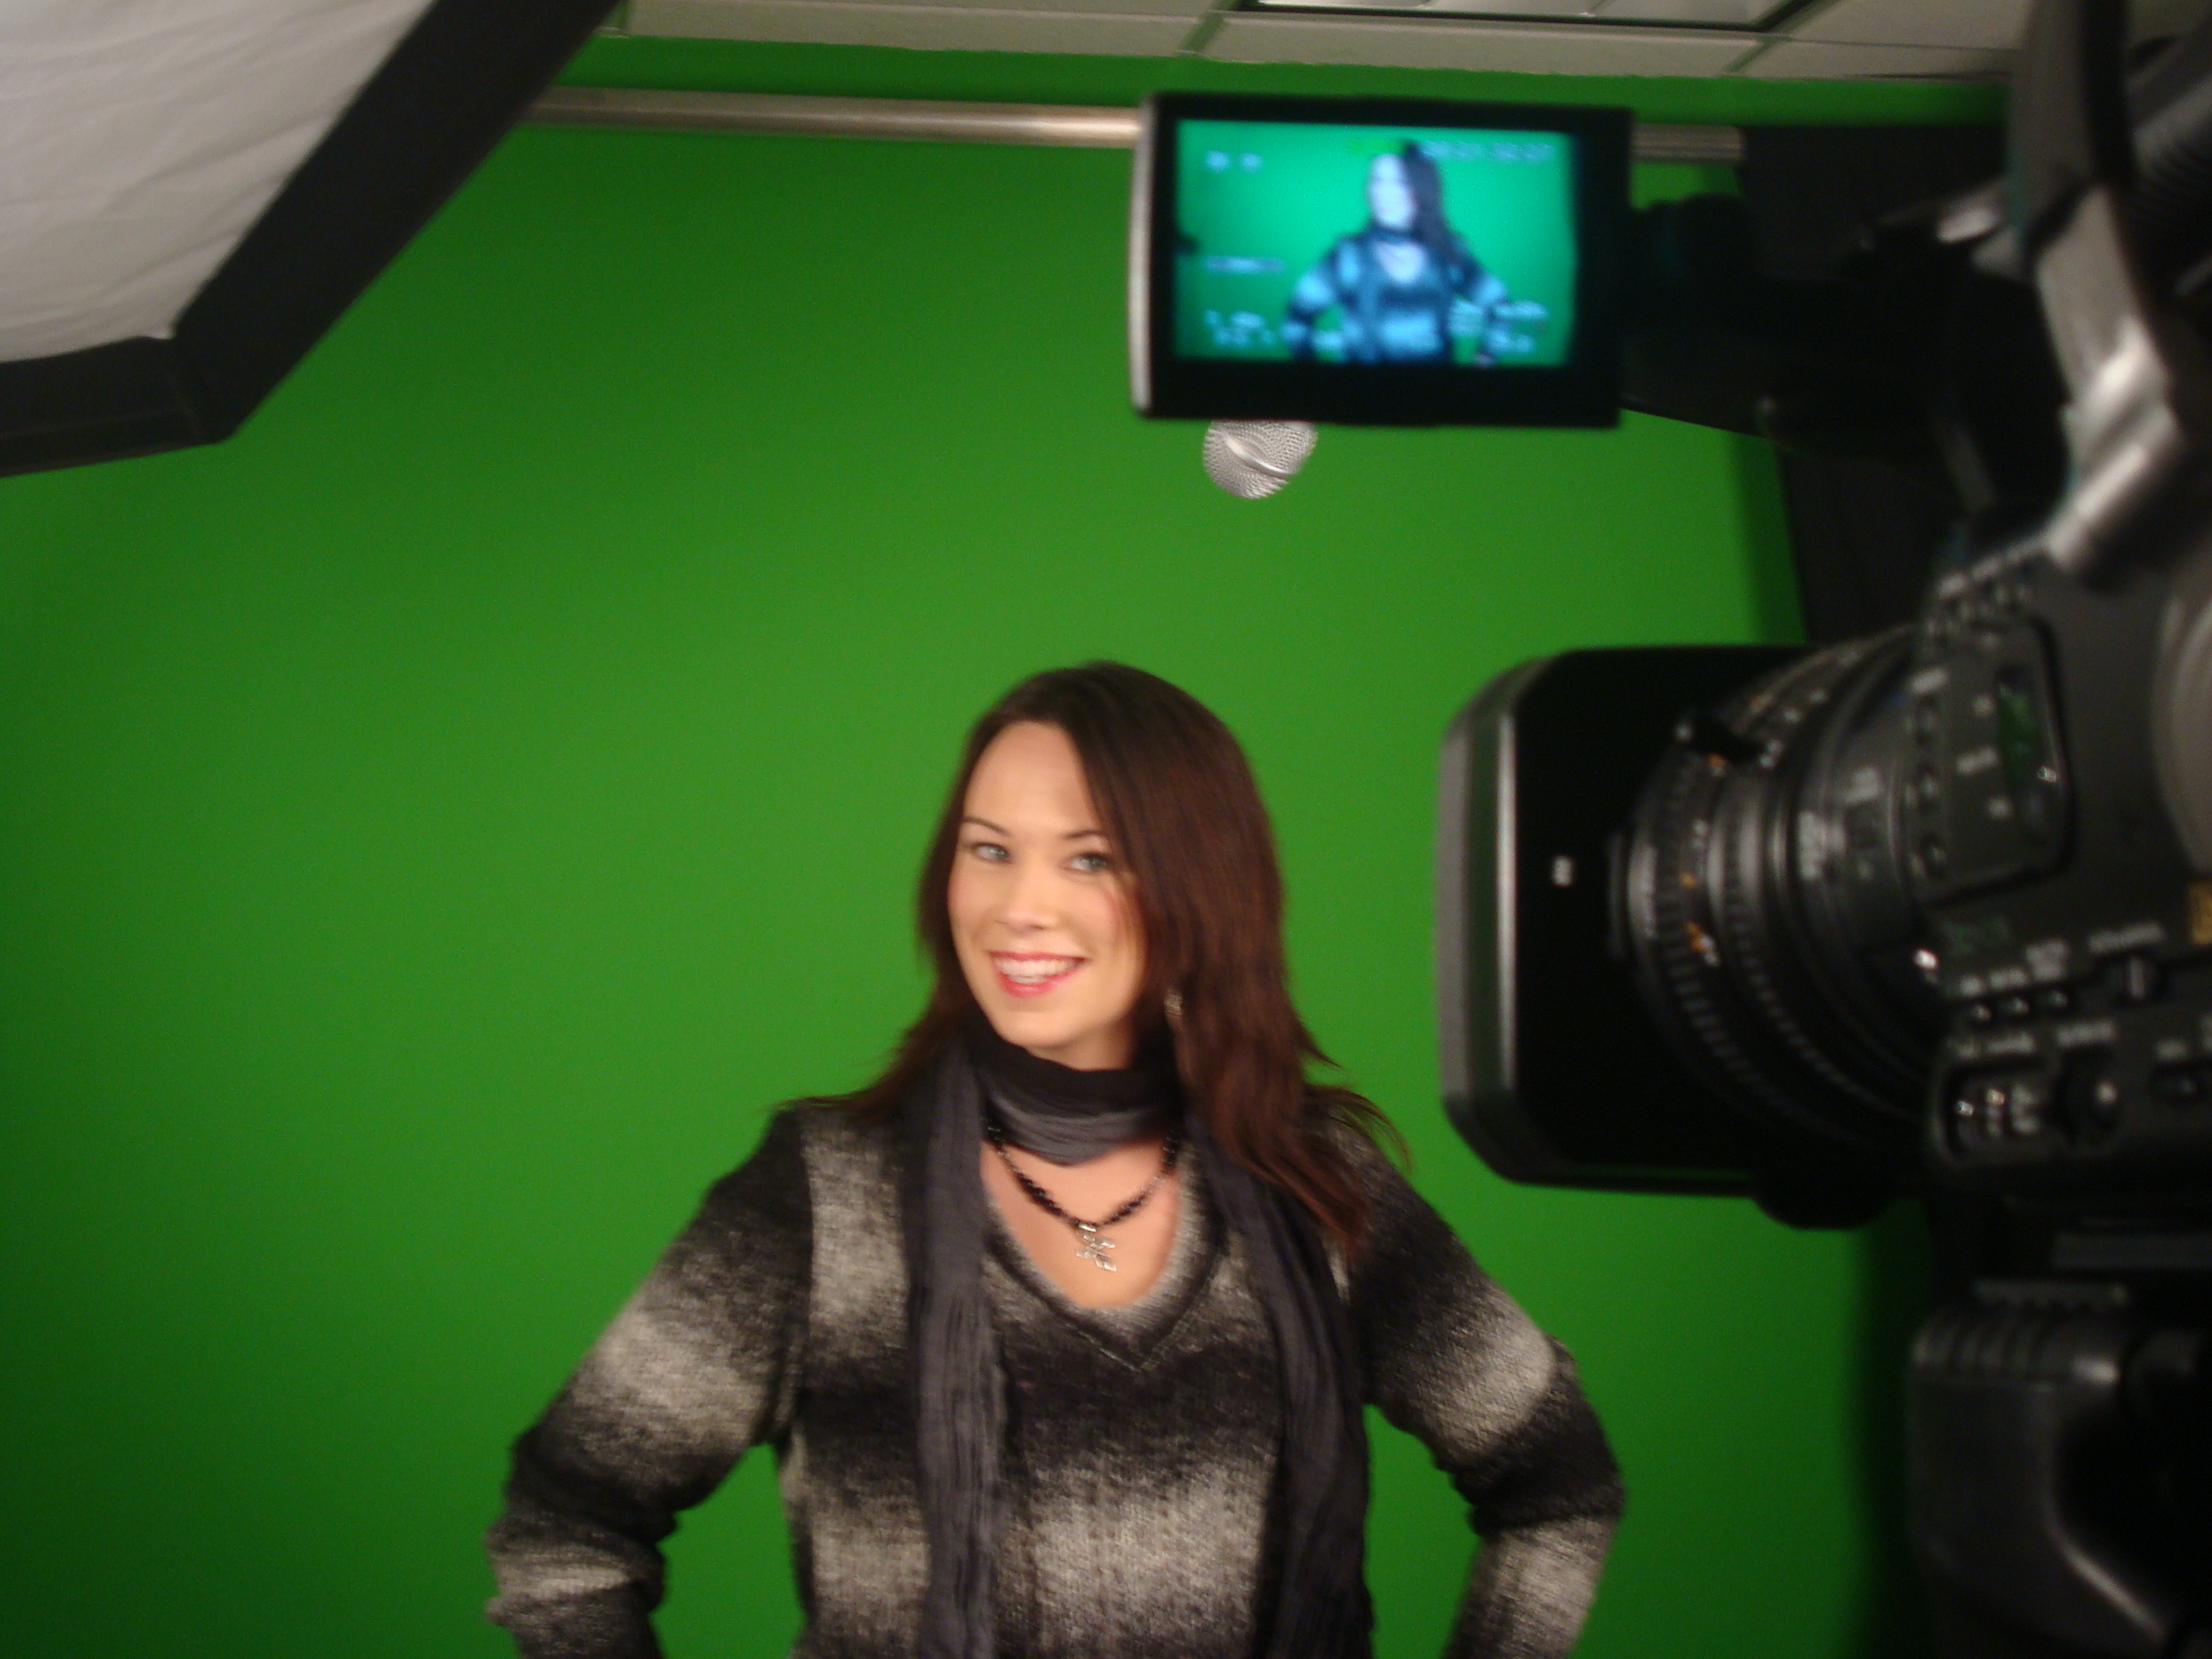 Shooting a segment for The Virtual Channel Network